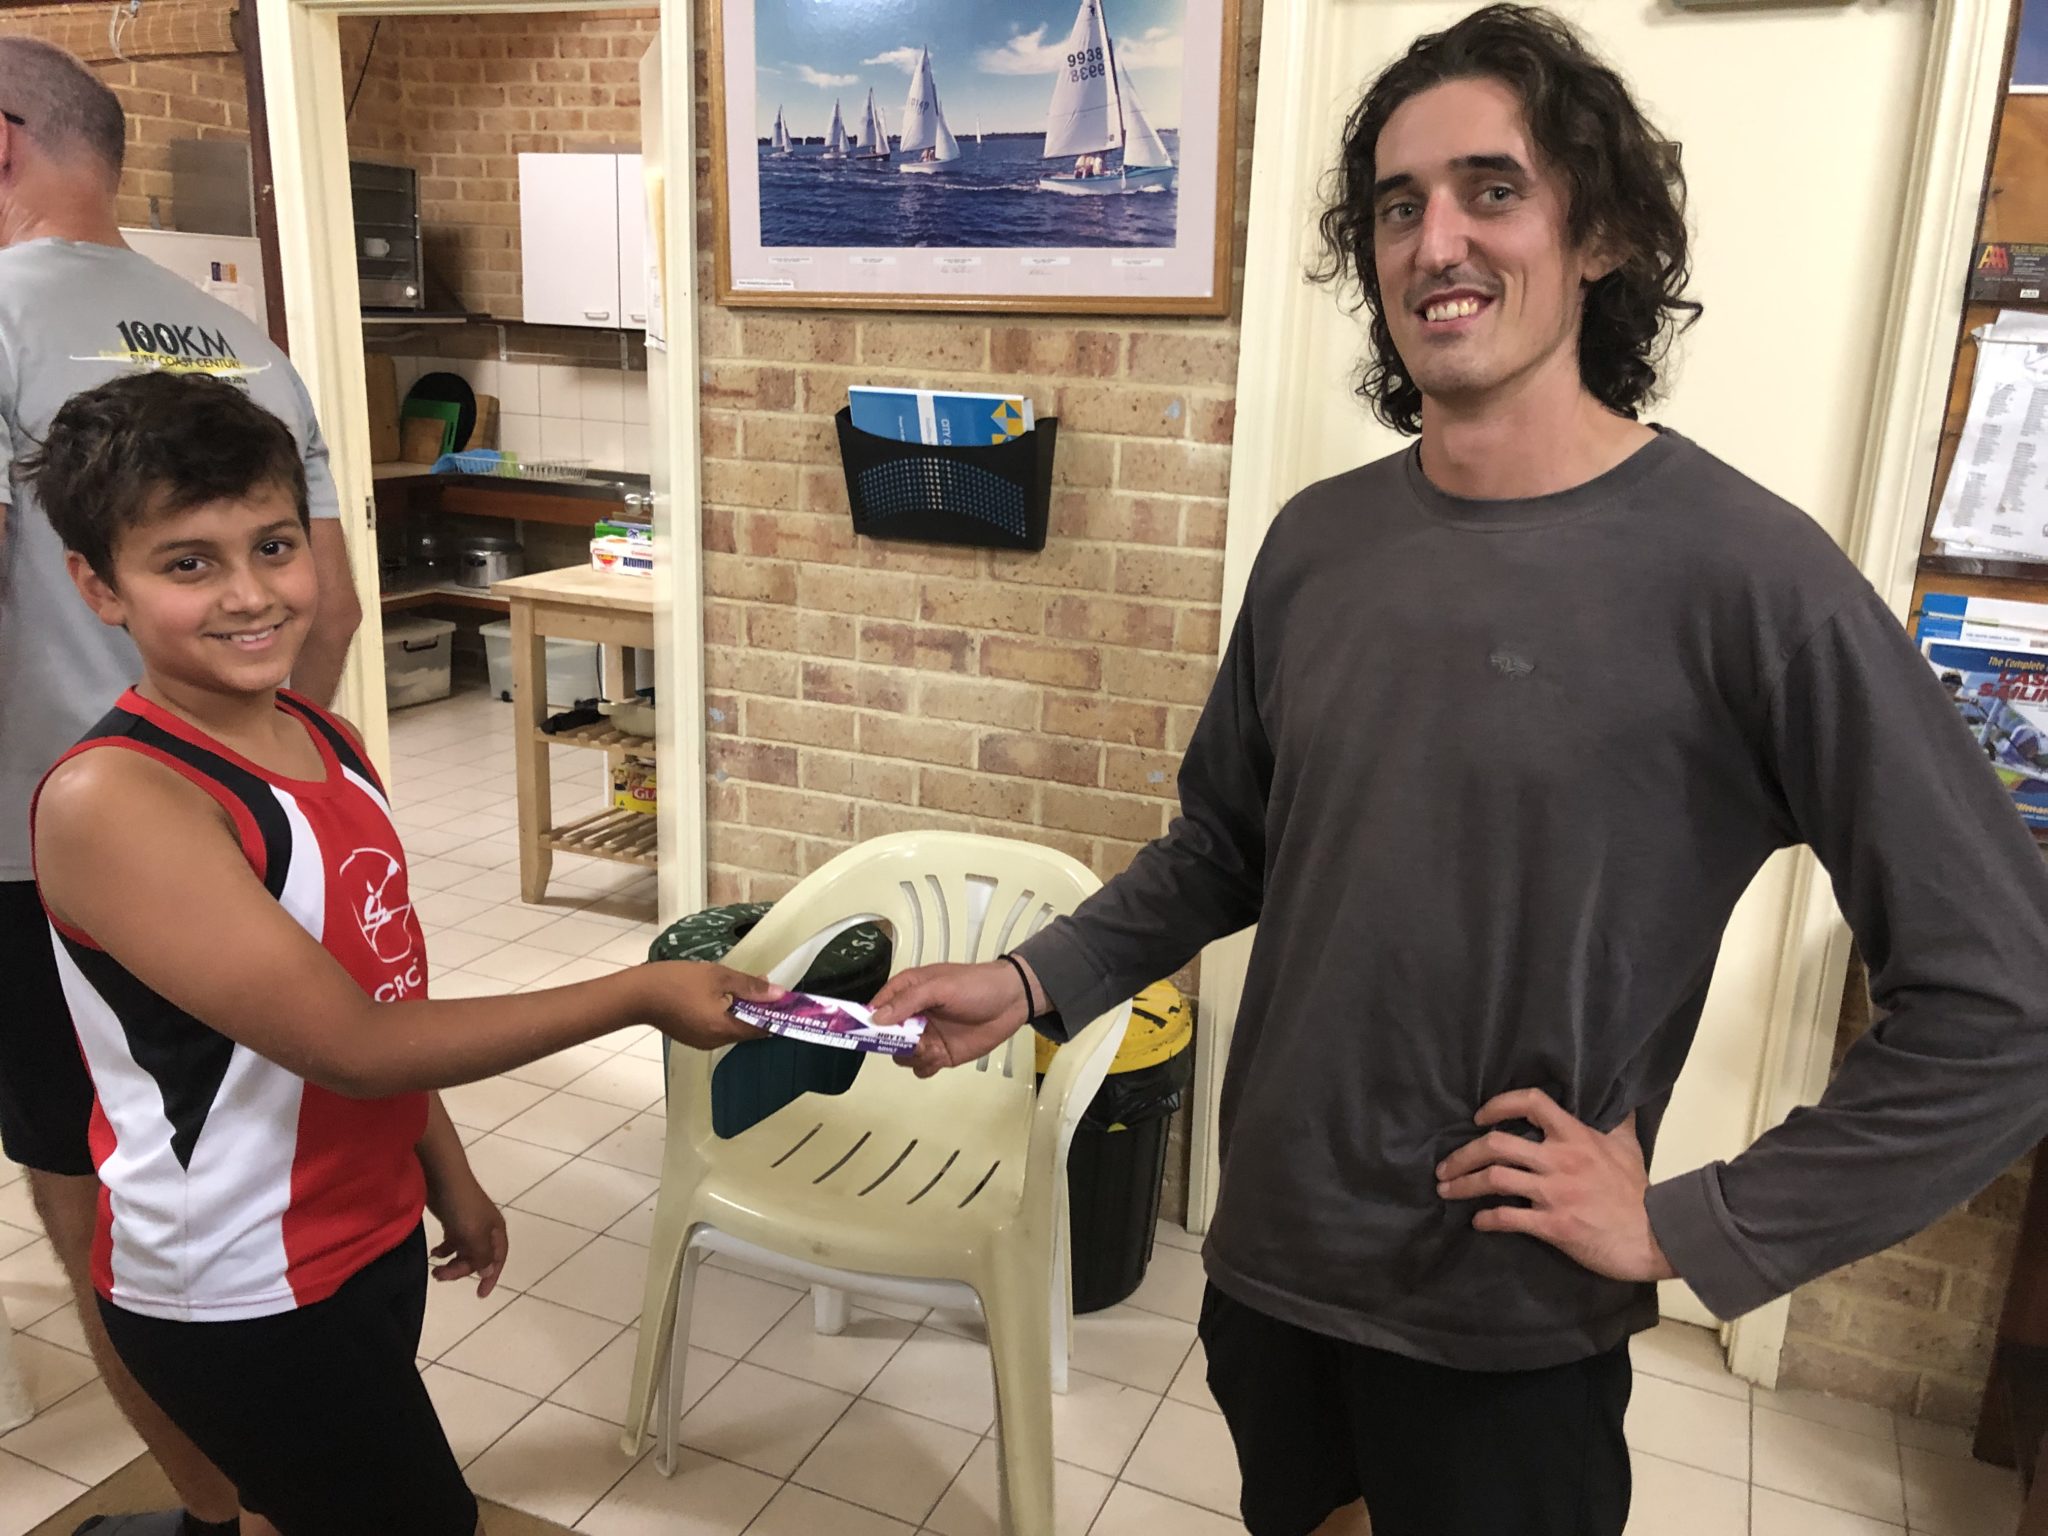 Tuesday 9th April 2019 : Tonight’s photo shows club member Connor Jacobs presenting Matt Jacob (no relation) with the winners movie voucher.